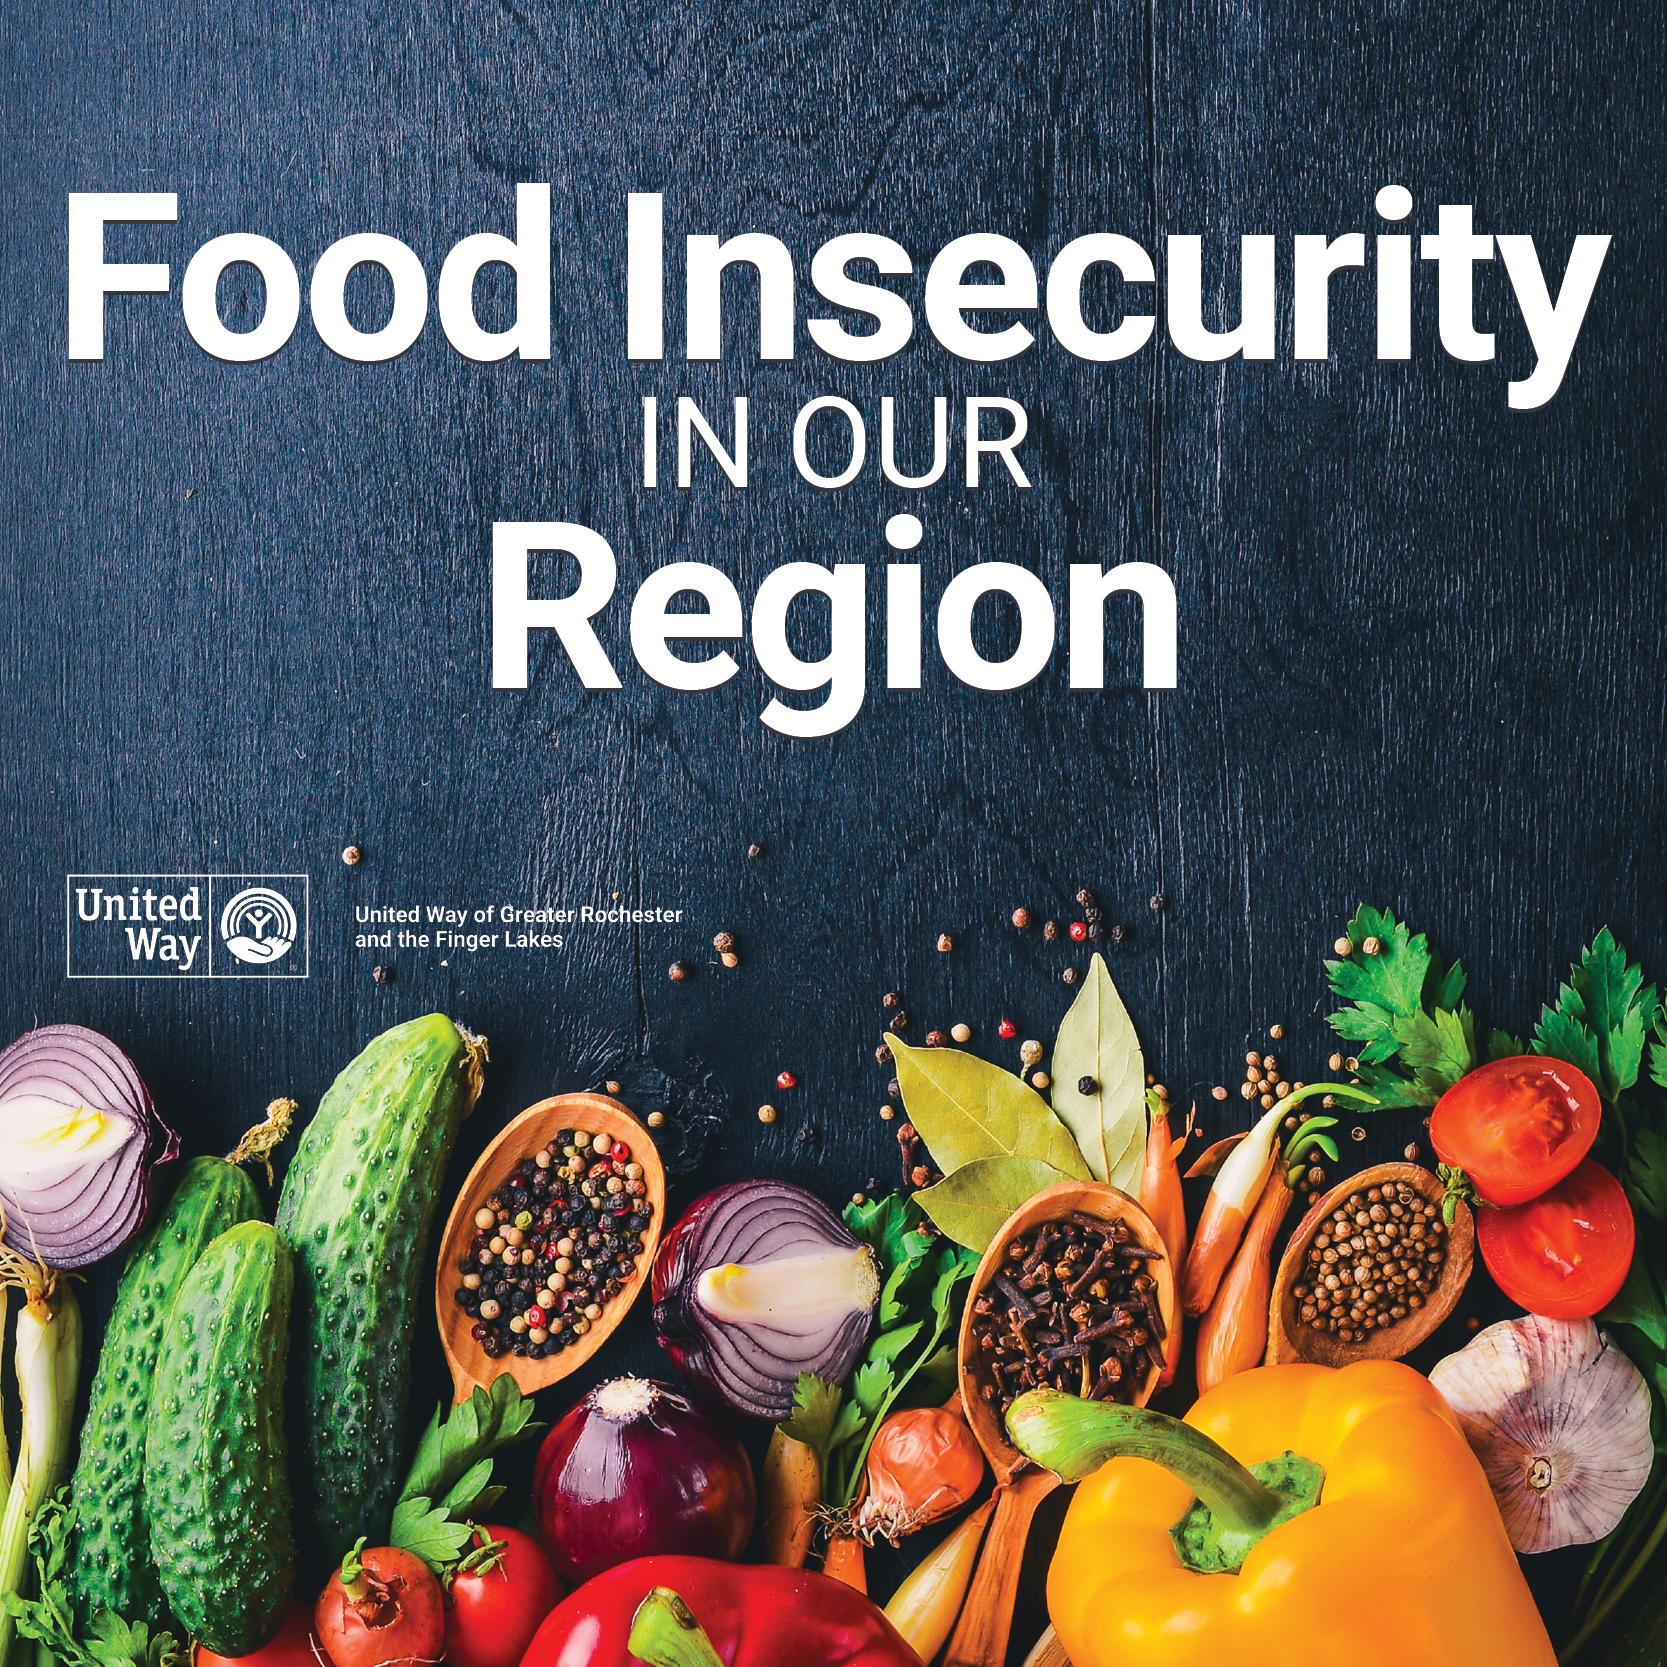 Emerging Leaders Society hosts Food Insecurity Panel